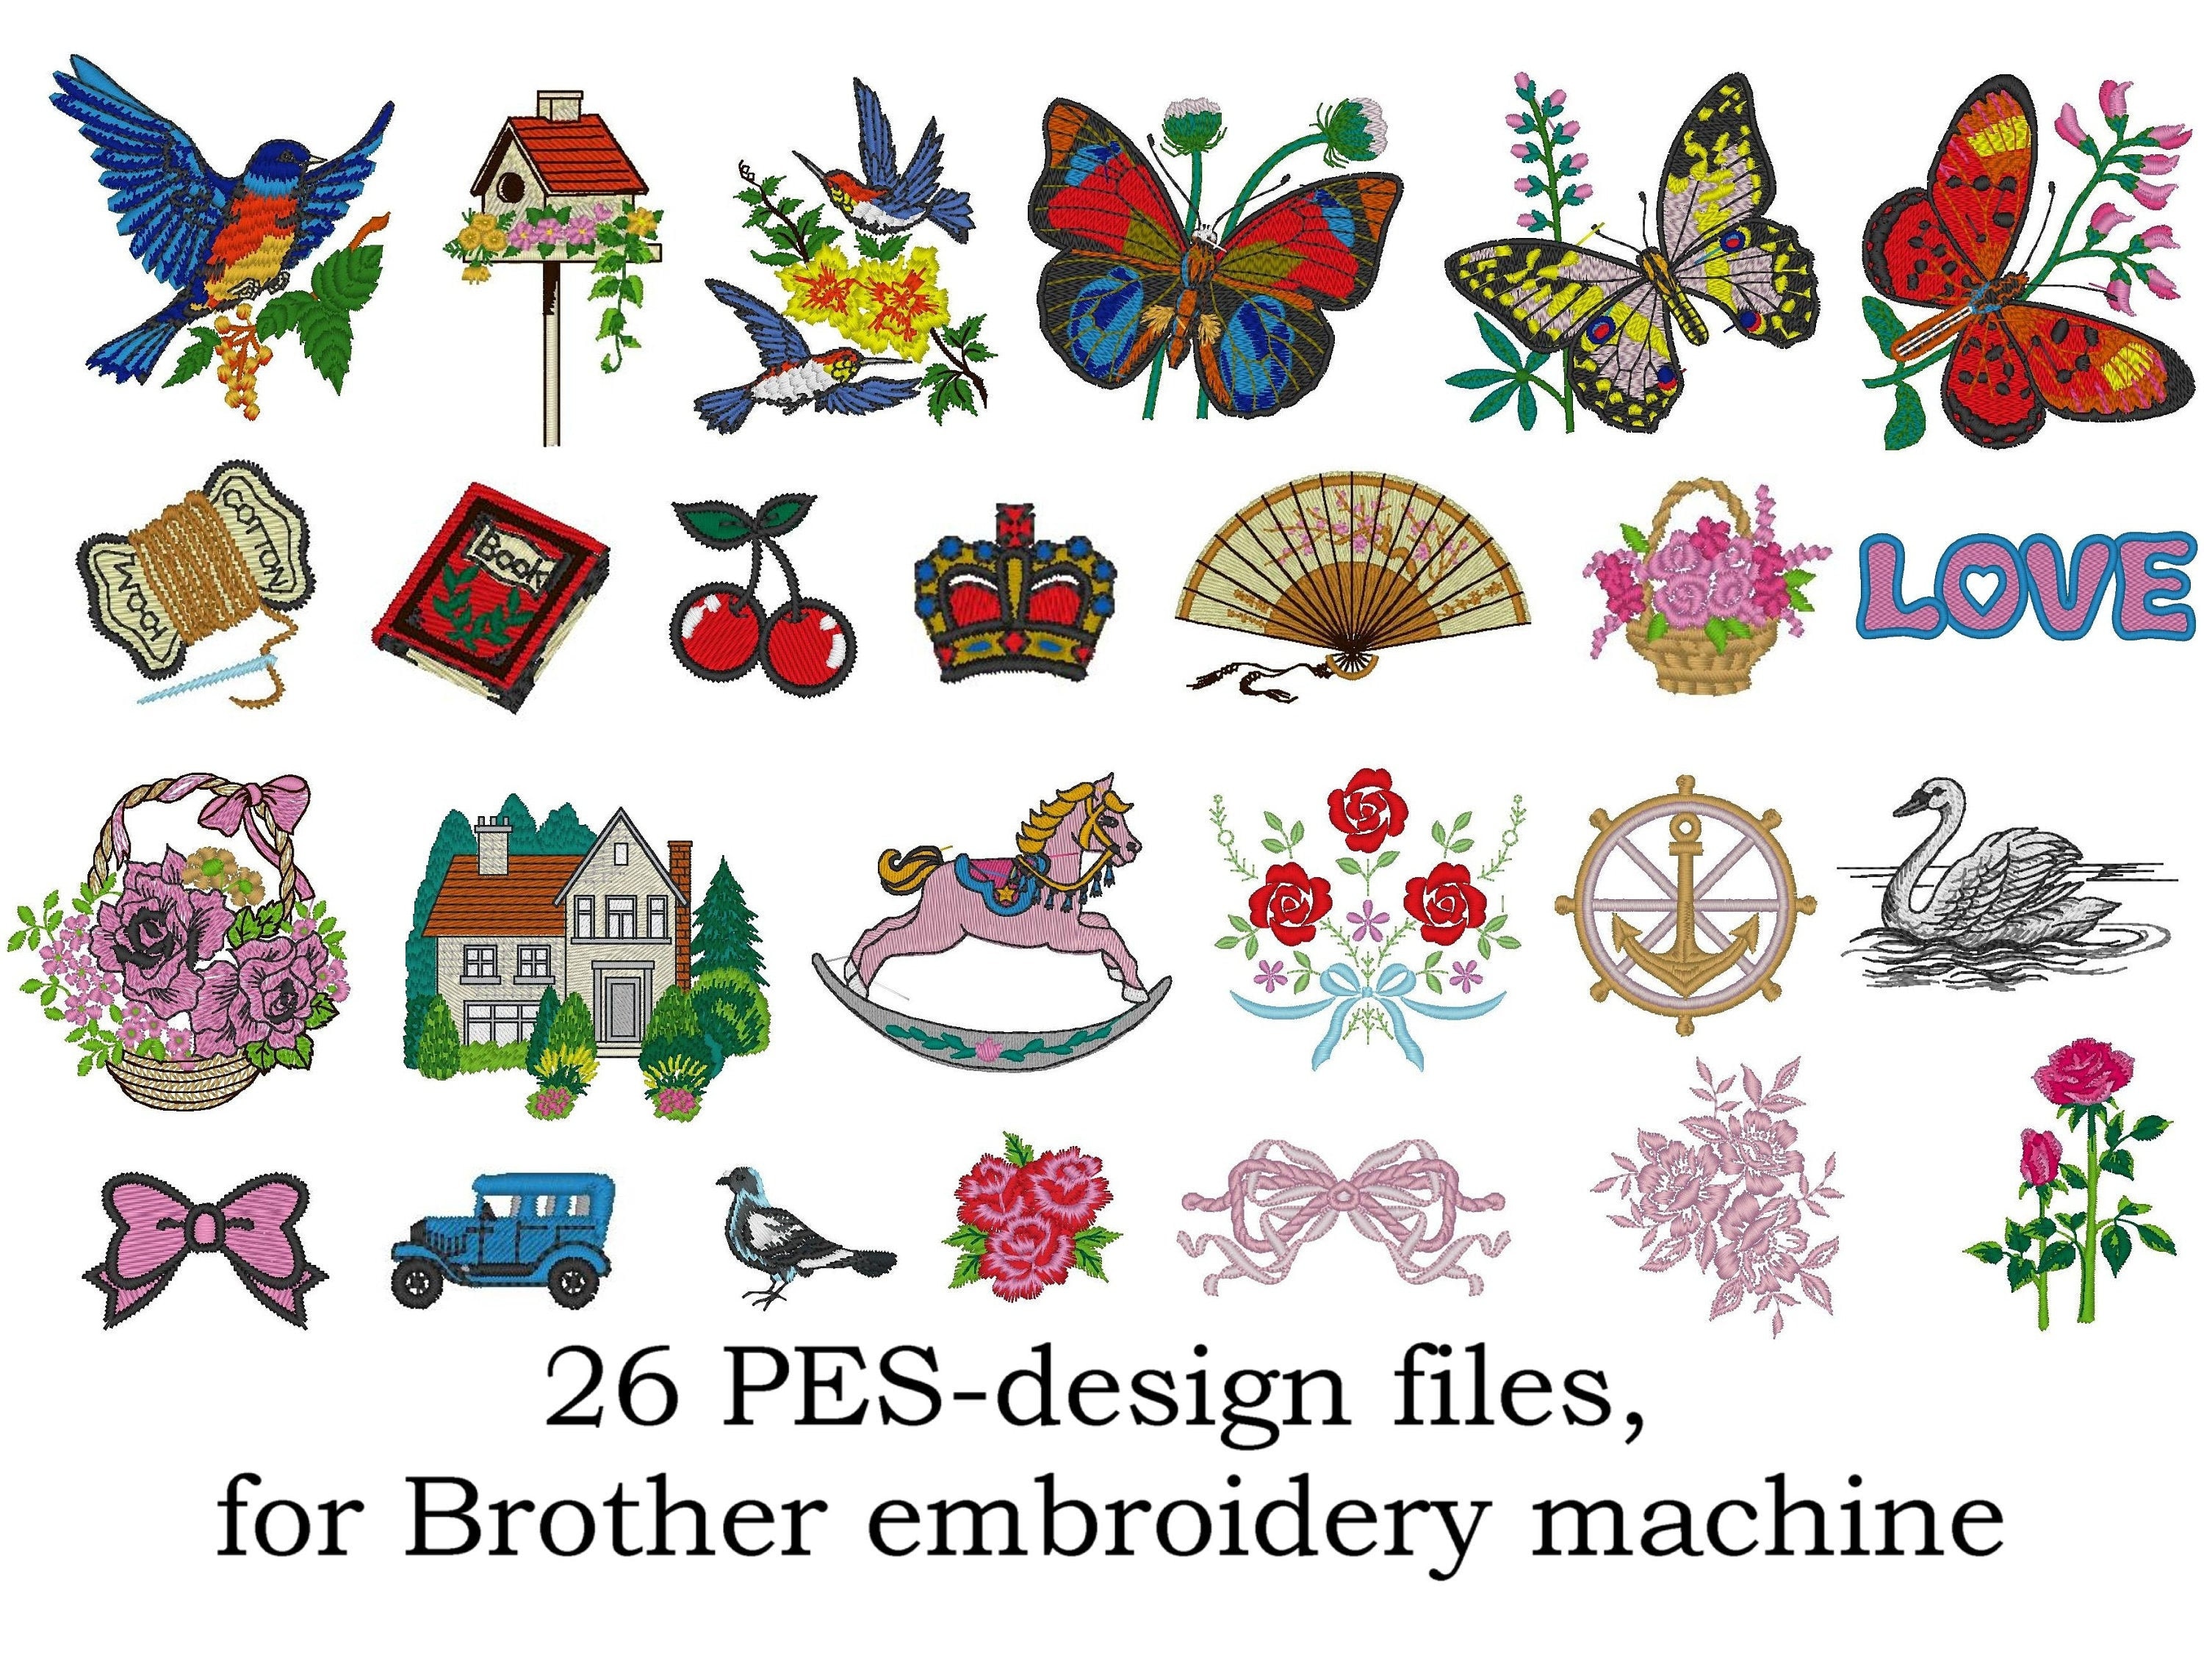 Free embroidery designs pes format - hongod